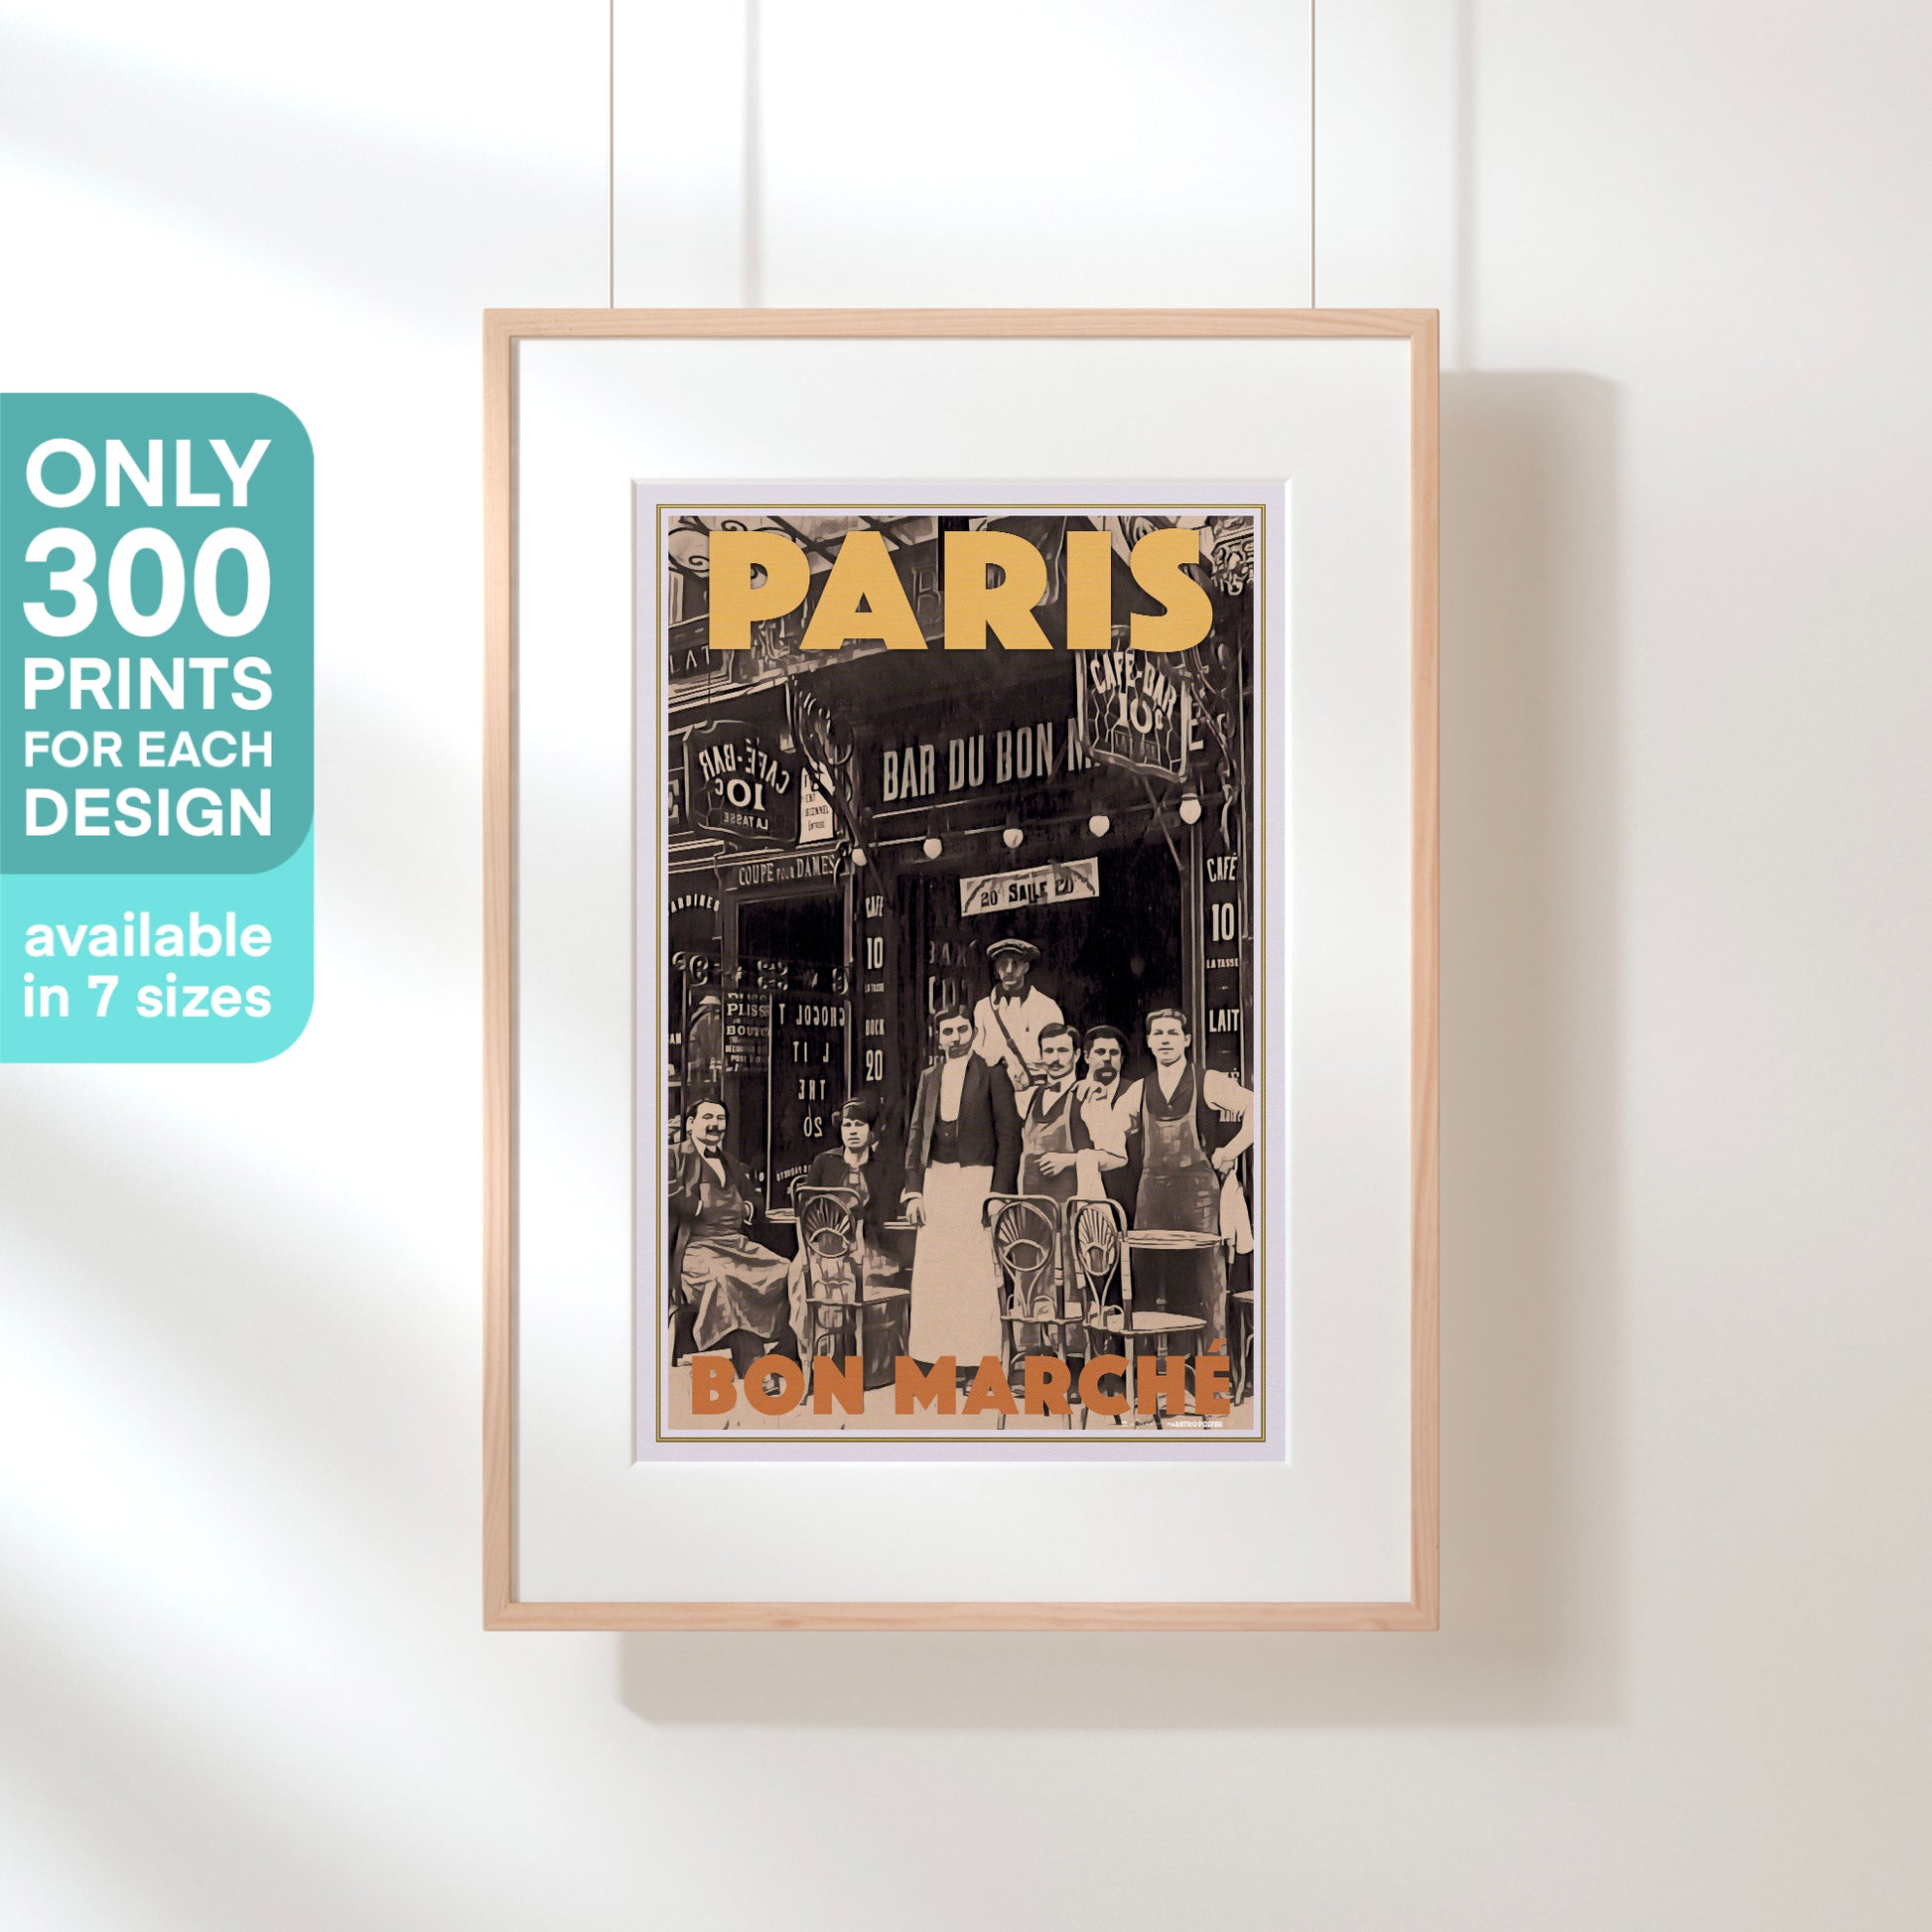 Limited Edition poster of the Good Market in Paris (Le Bon Marché)